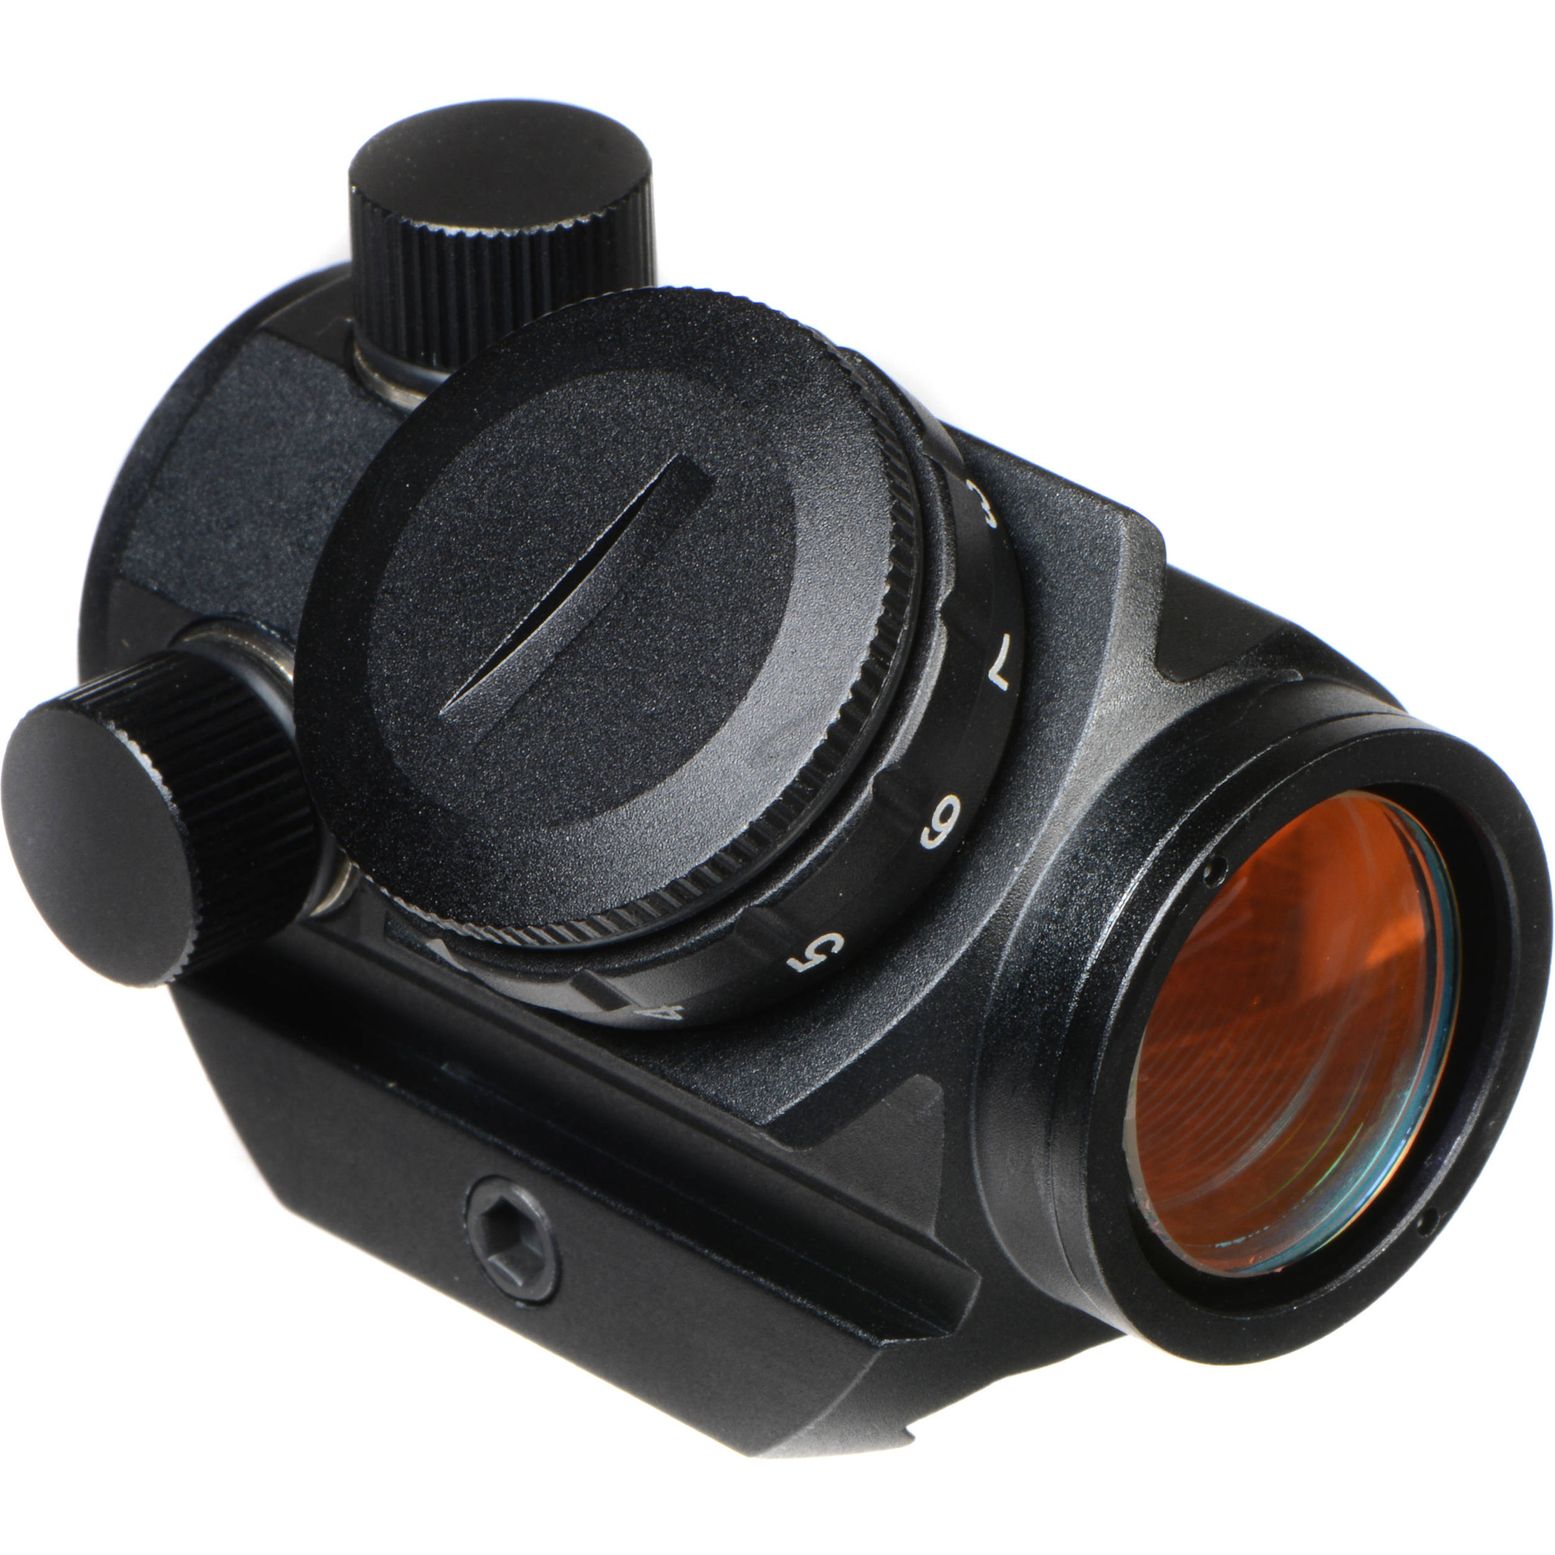 Bushnell s TRS 25 Red Dot Gun Sight Just How Good Is It The 